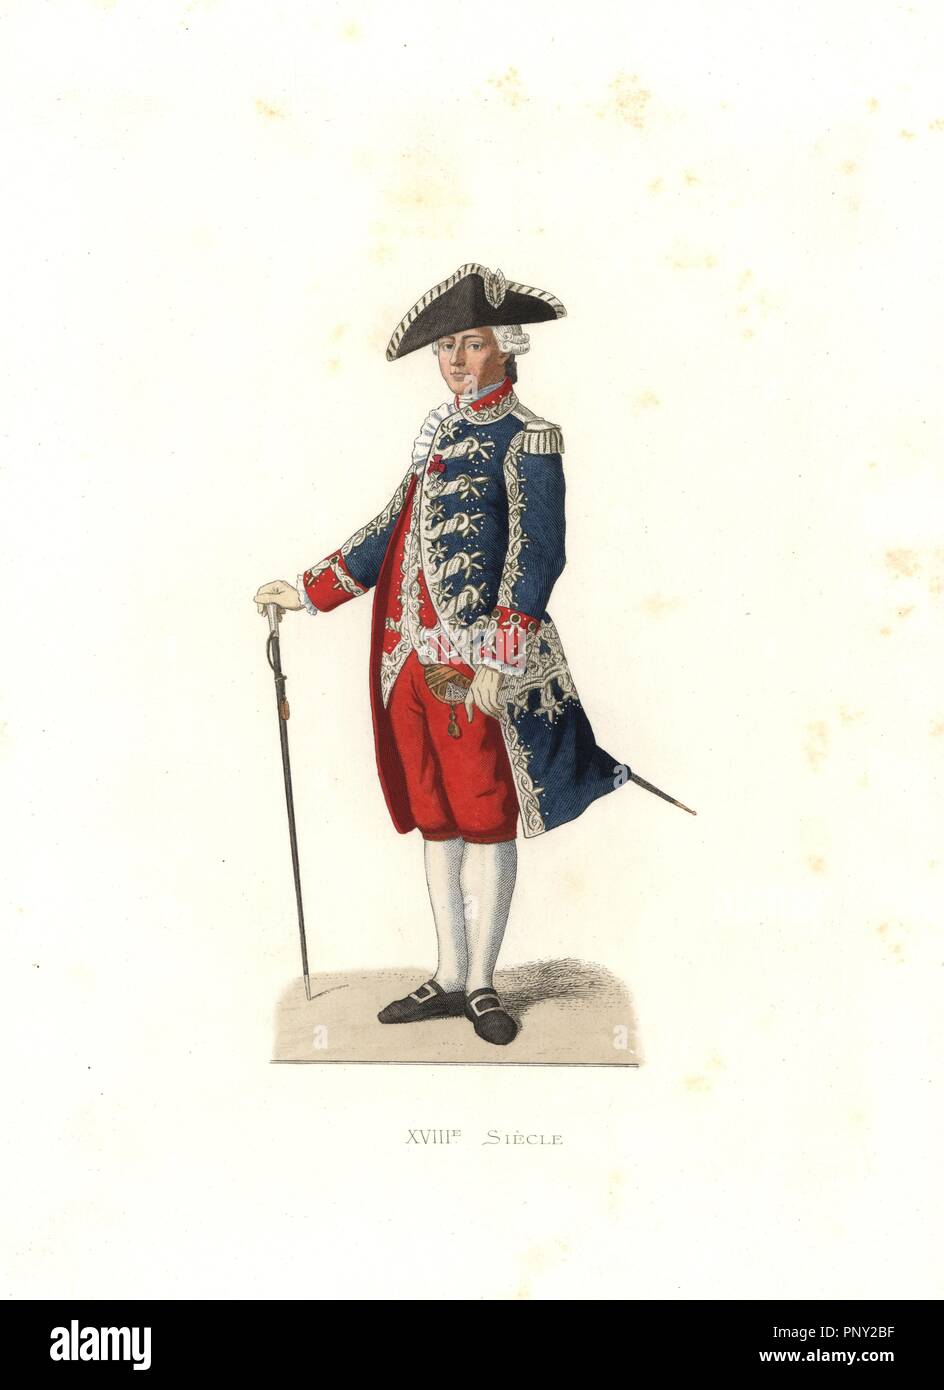 Count of Vergennes, captain of the Gardes de la Porte du Roi, France, 18th century. Handcolored illustration by E. Lechevallier-Chevignard, lithographed by A. Didier, L. Flameng, F. Laguillermie, from Georges Duplessis's 'Costumes historiques des XVIe, XVIIe et XVIIIe siecles' (Historical costumes of the 16th, 17th and 18th centuries), Paris 1867. The book was a continuation of the series on the costumes of the 12th to 15th centuries published by Camille Bonnard and Paul Mercuri from 1830. Georges Duplessis (1834-1899) was curator of the Prints department at the Bibliotheque nationale. Edmond  Stock Photo